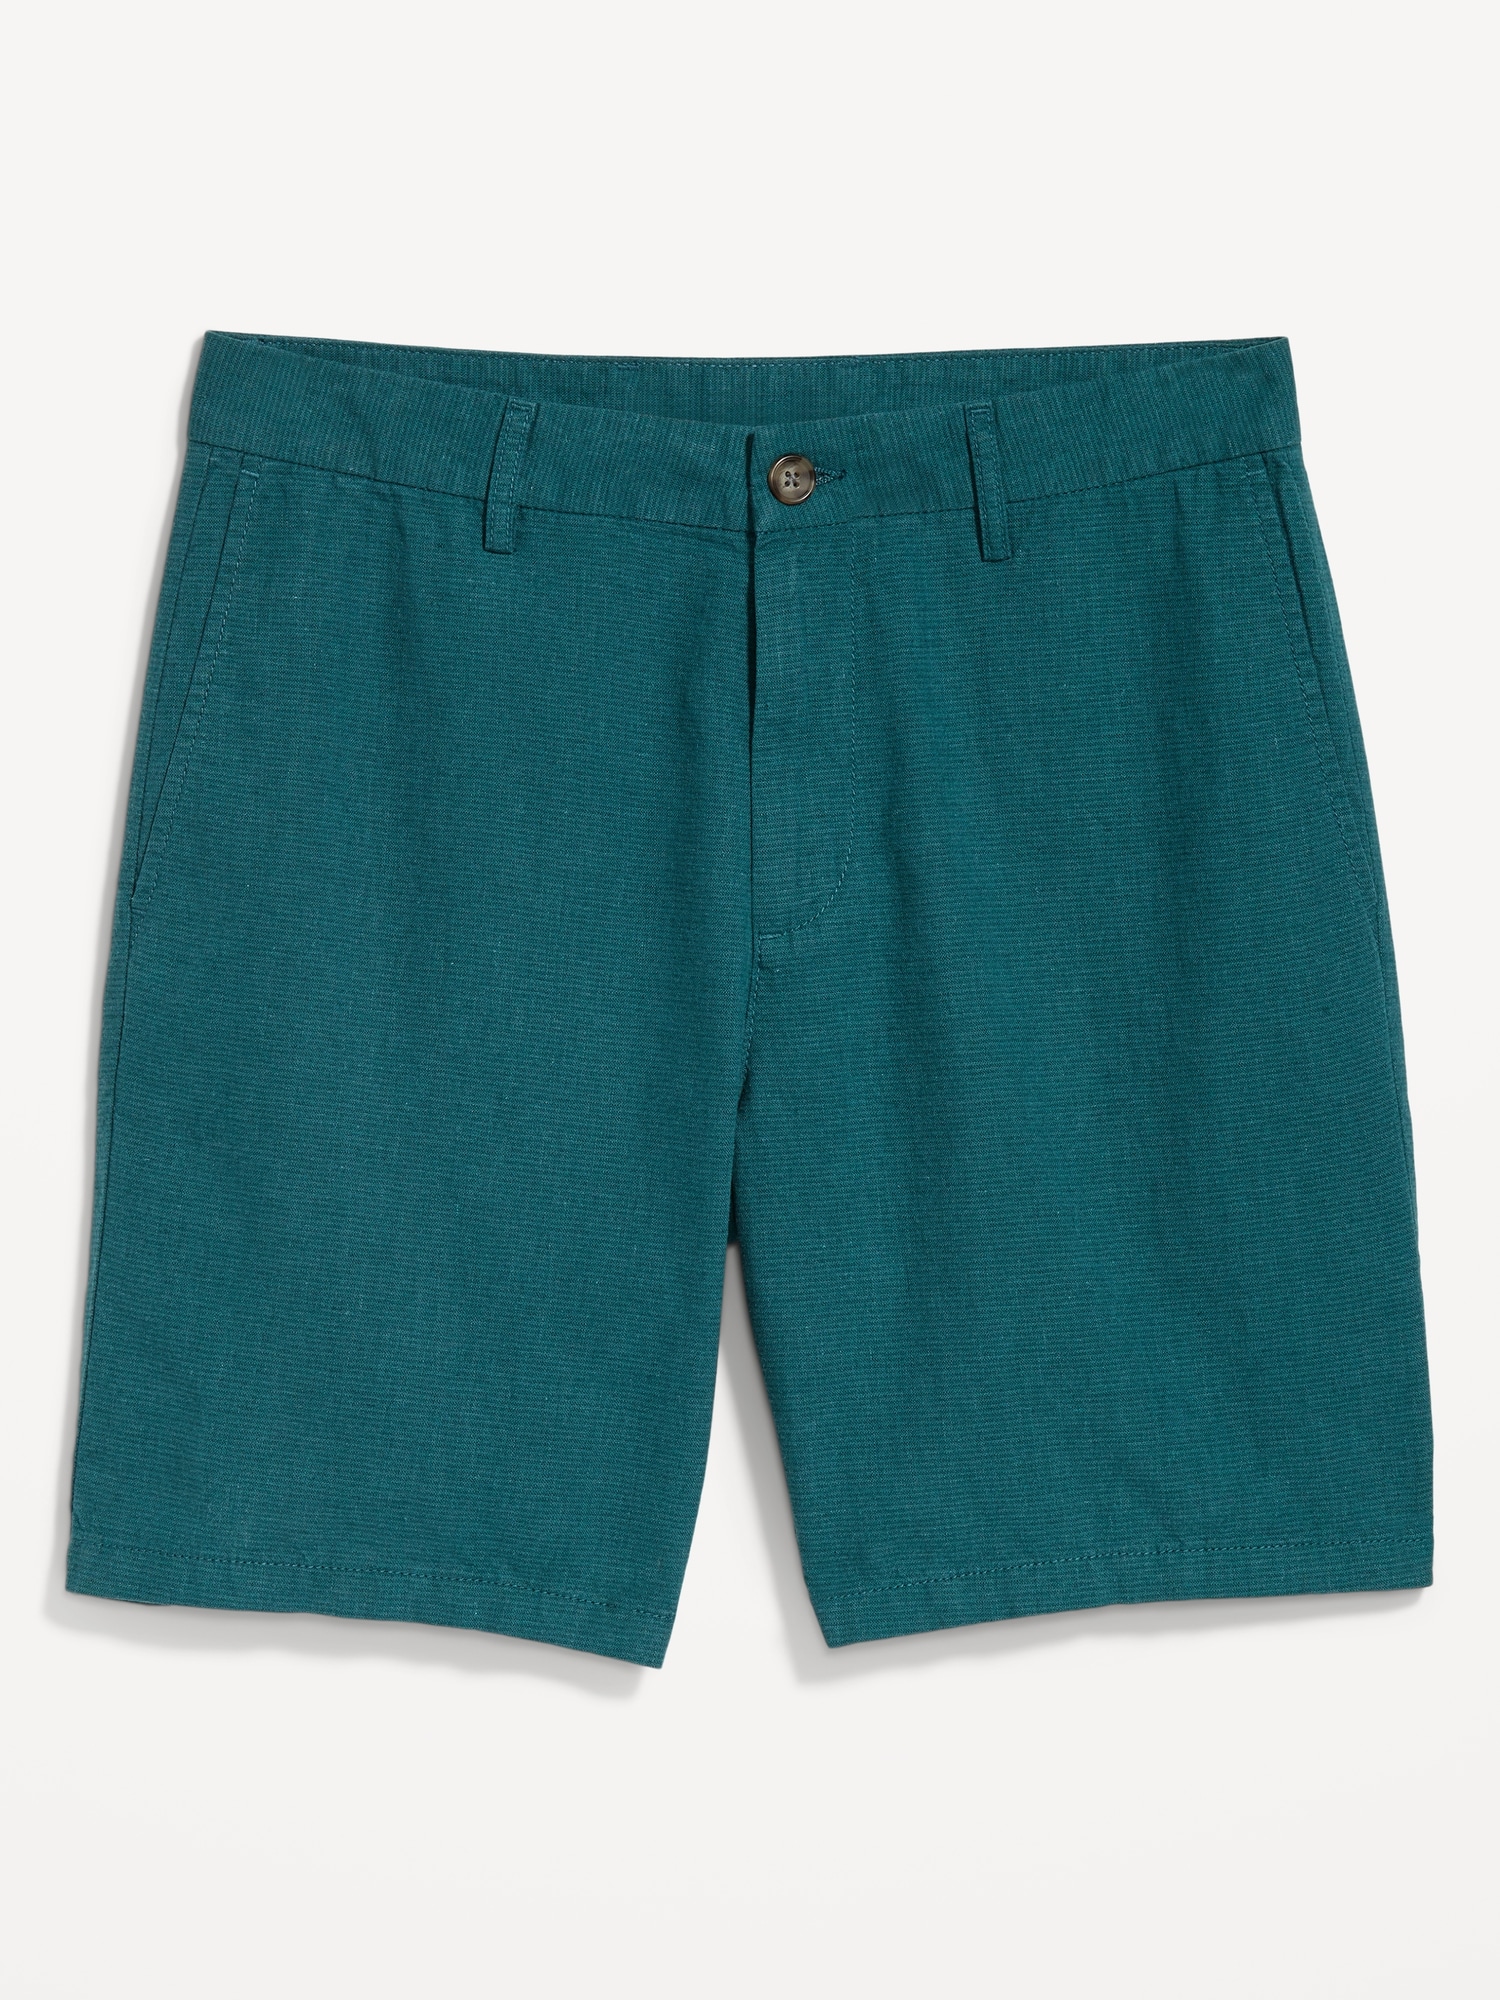 Rotation Chino Linen-Blend Shorts -- 8-inch inseam | Old Navy